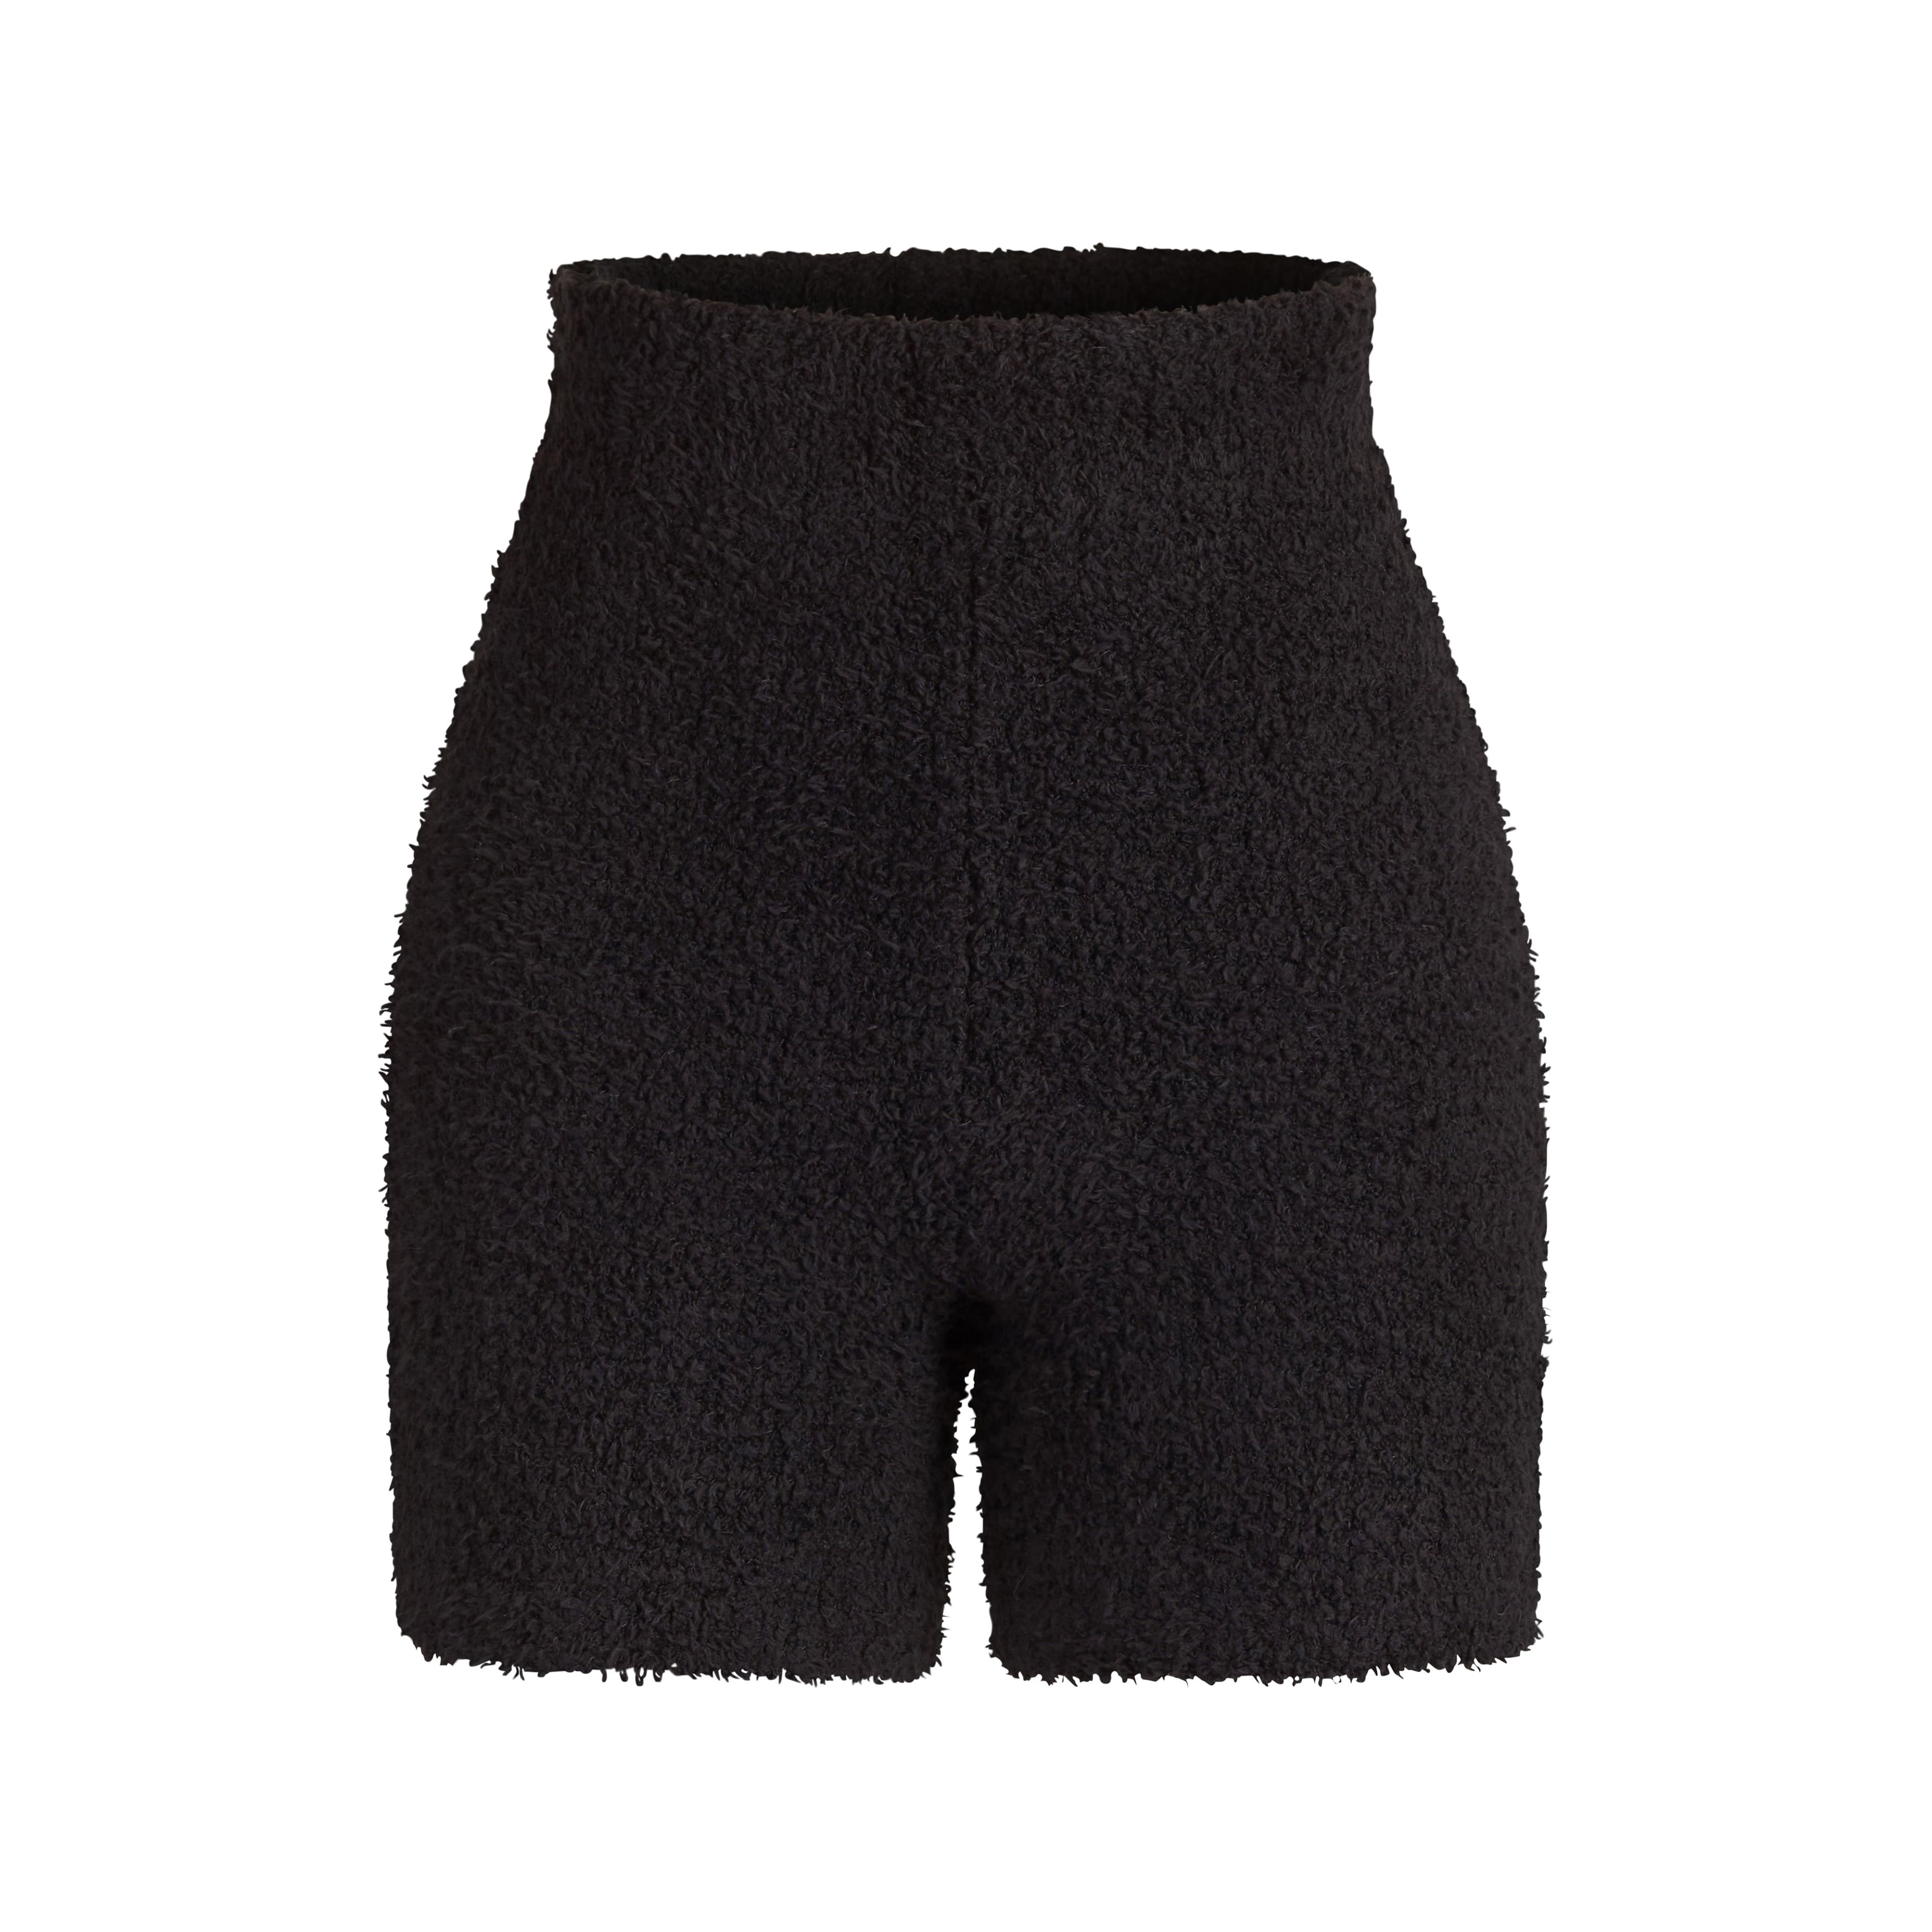 Skims Cozy Knit Boucle Soft Fuzzy High Waisted Shorts in Onyx Black Size S/M